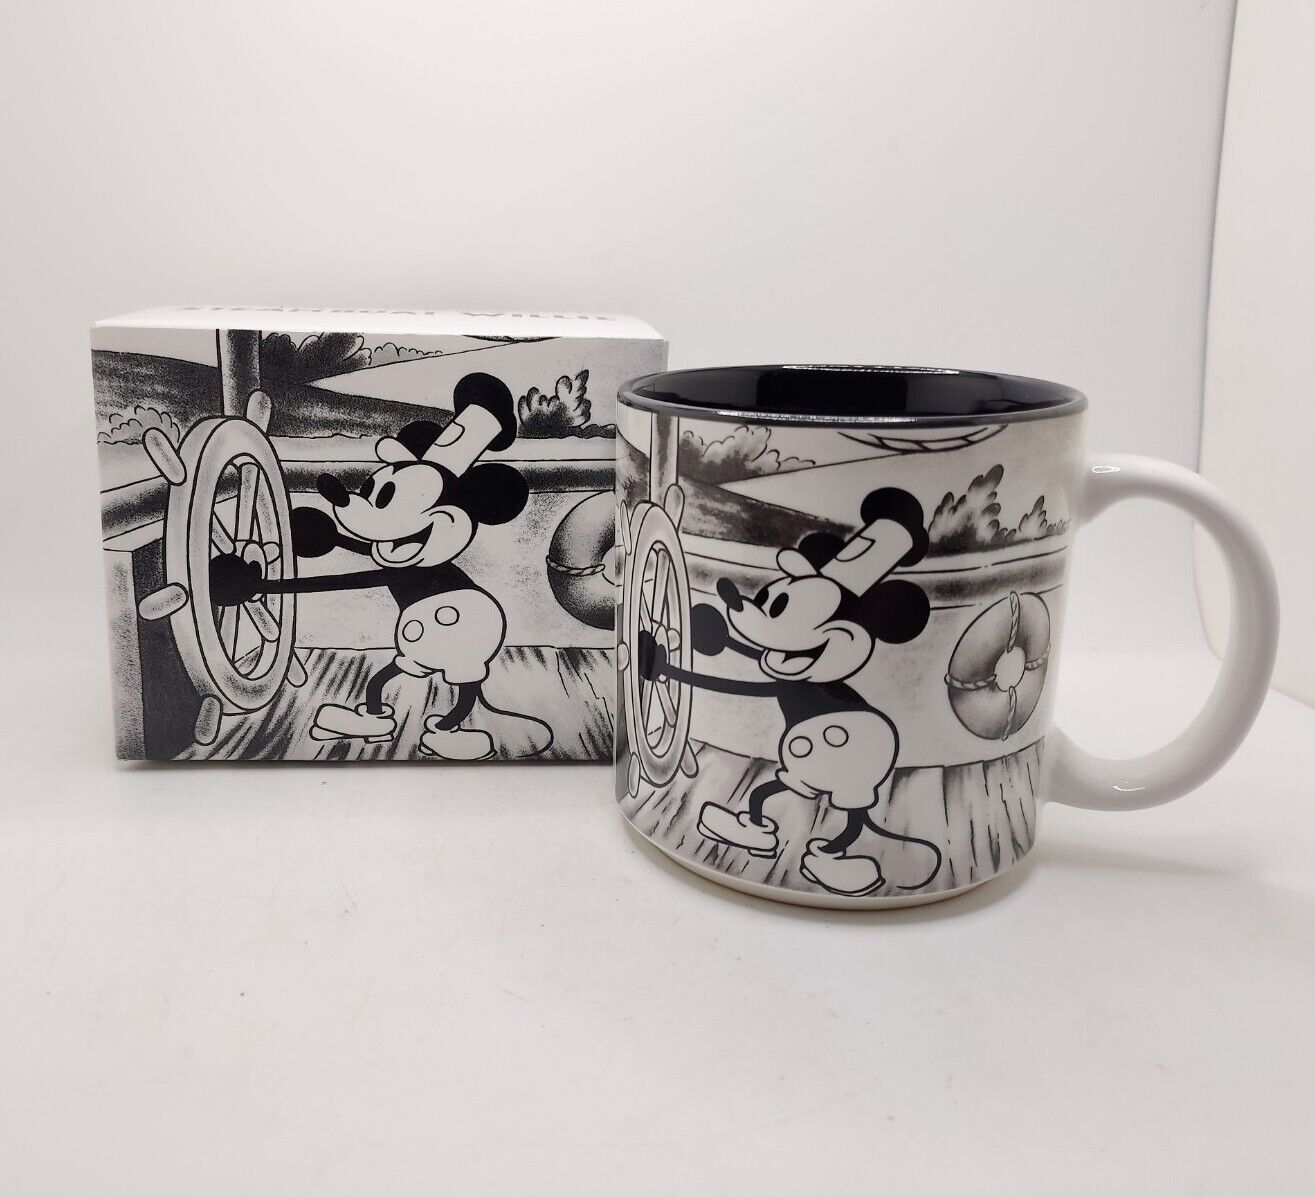 Vtg Disney Store Steamboat Willie Mickey Mouse Collectible Mug 1990s New In Box